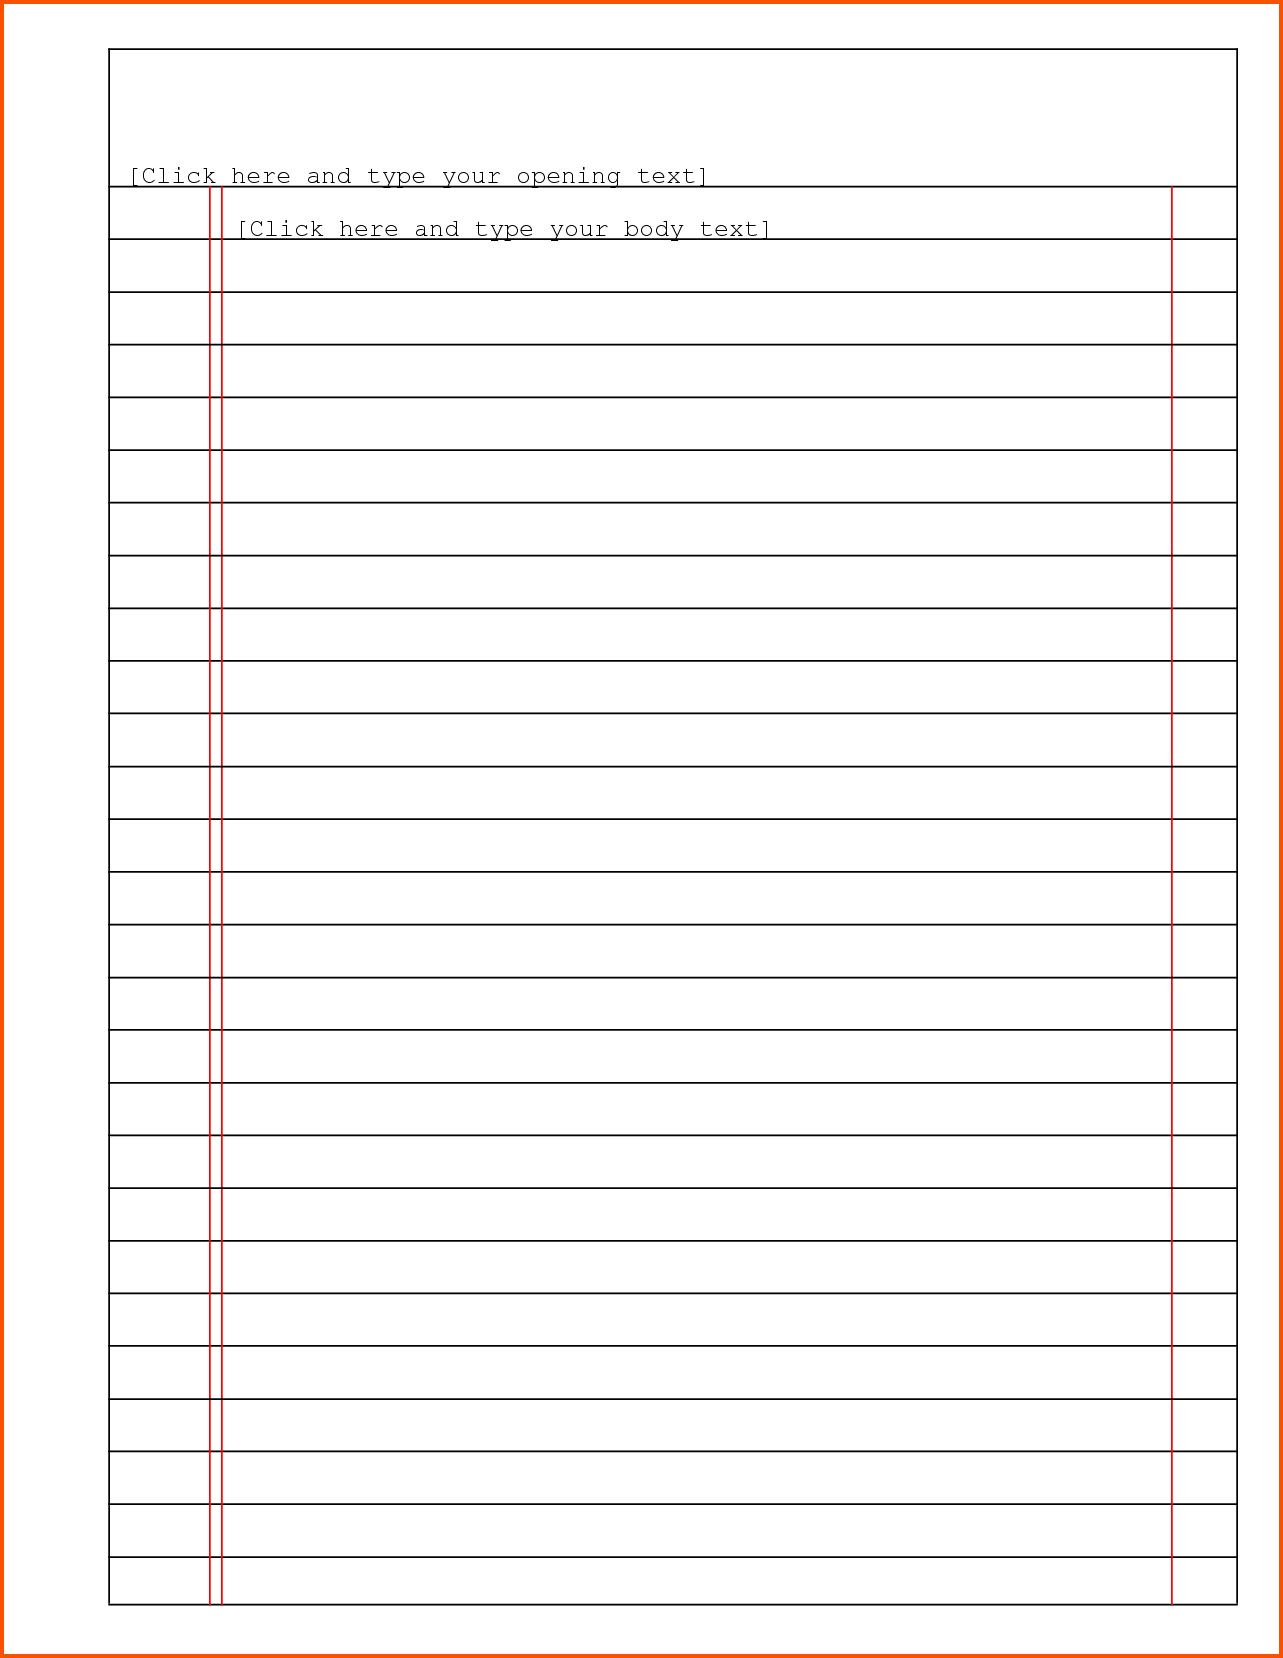 Dot Paper Word Document | Resume Format Quantity Surveyor With Ruled Paper Word Template